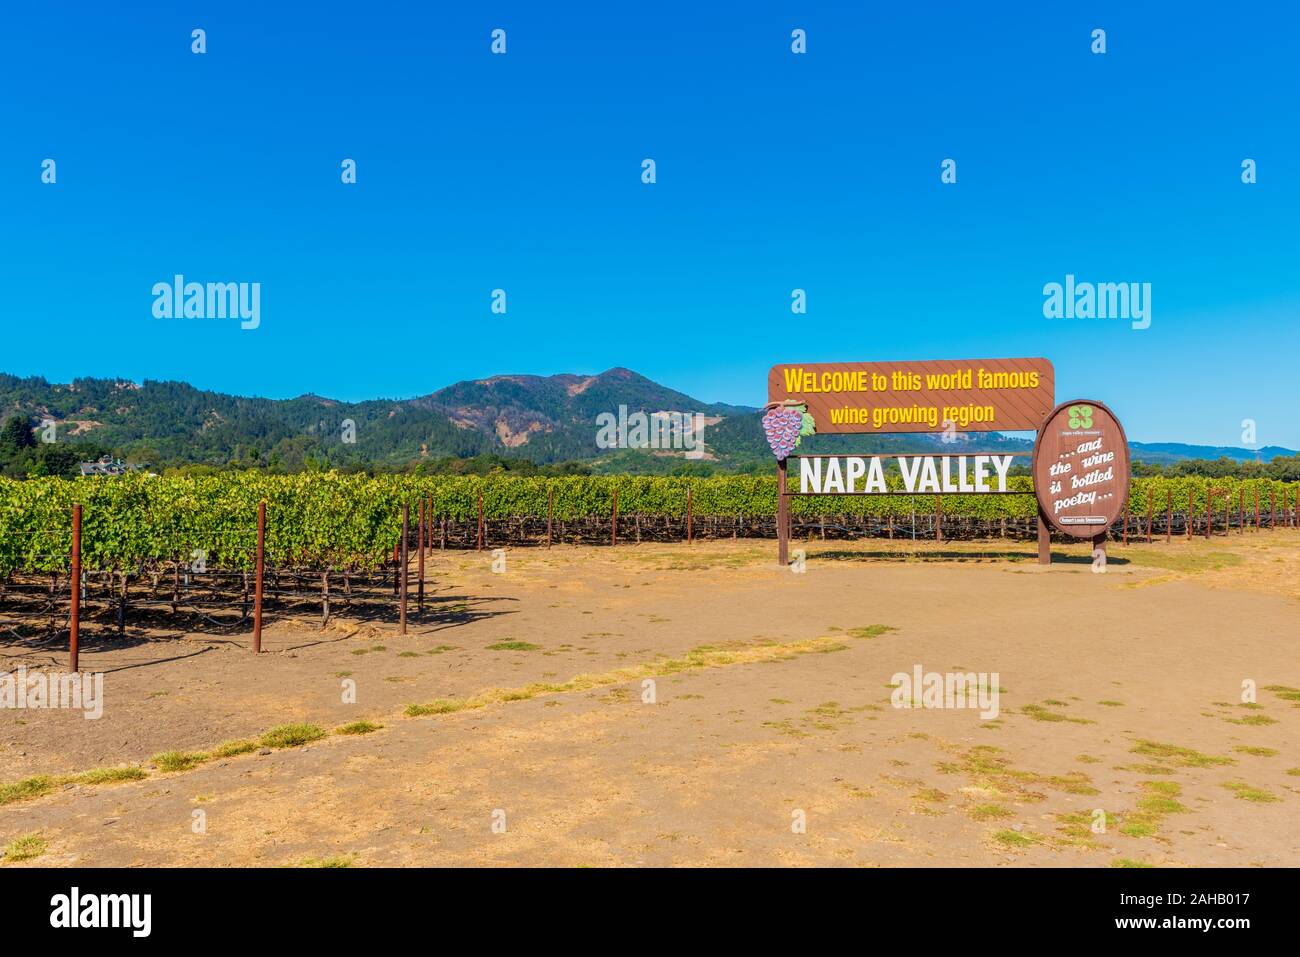 Welcome to Napa Valley Sign in Napa, California, USA. Napa County is known for its famous regional wine industry. Stock Photo